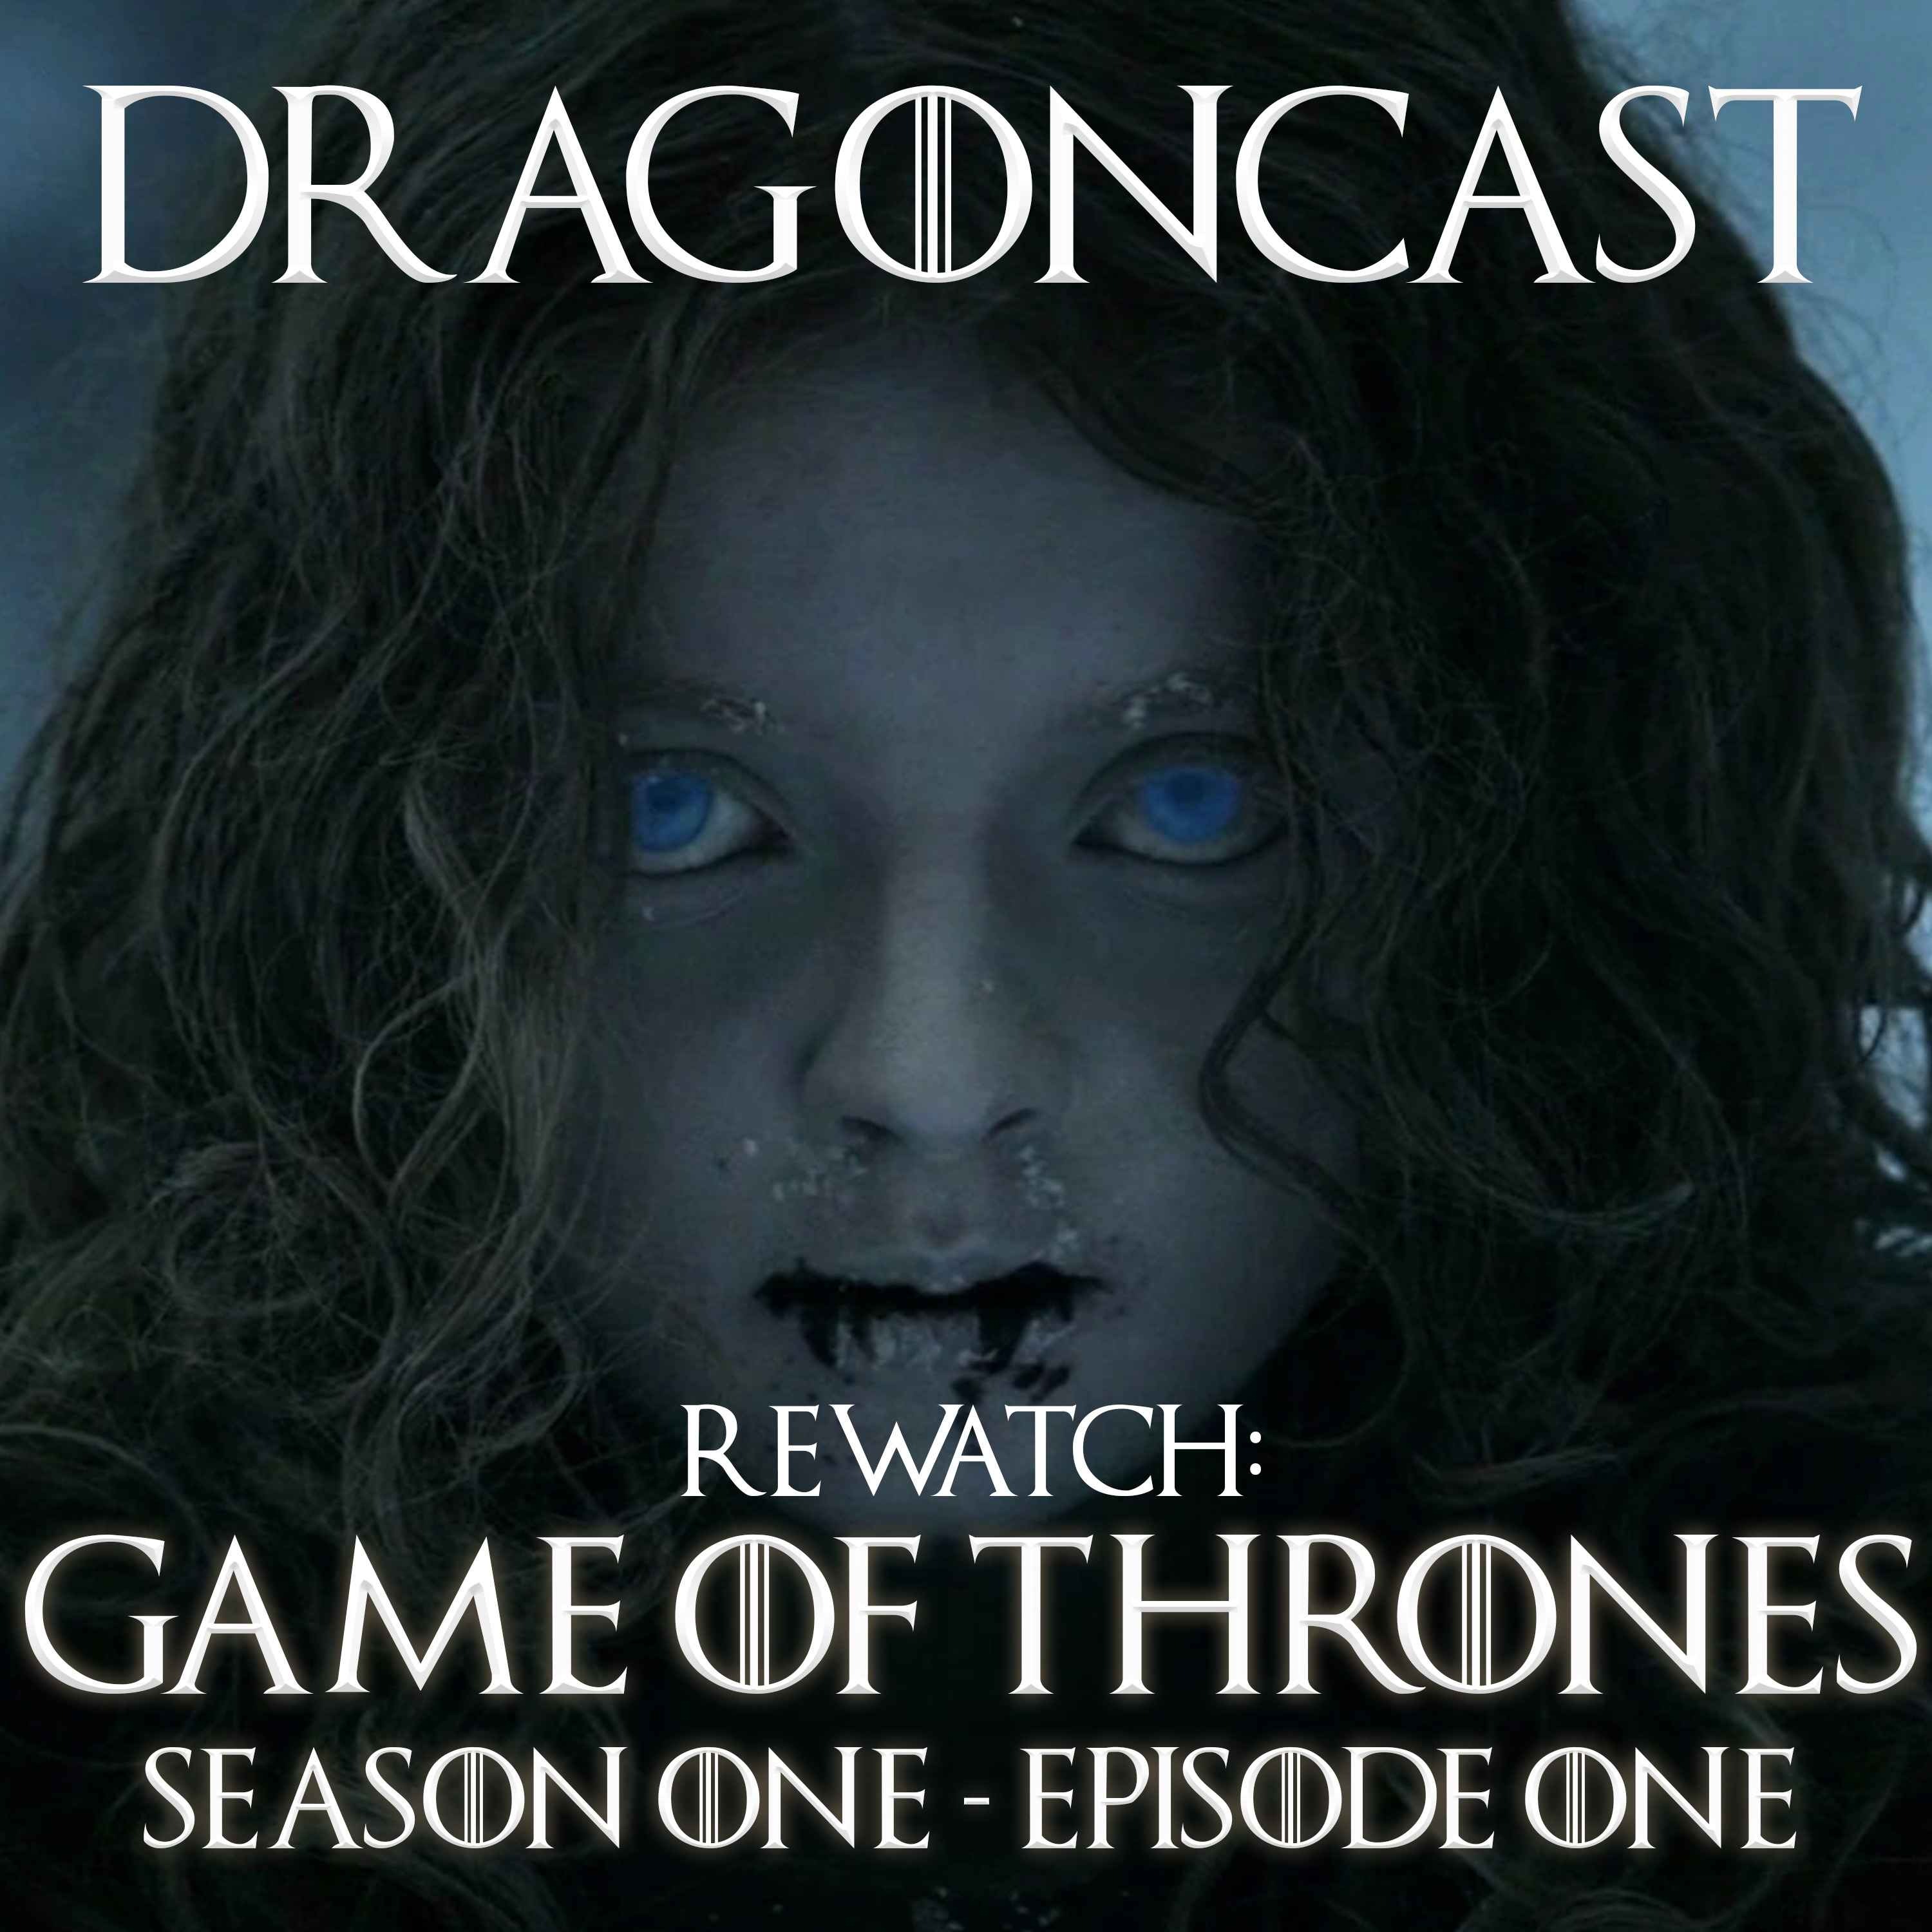 Game of Thrones Rewatch Episode: S1 E1 - Winter is Coming.